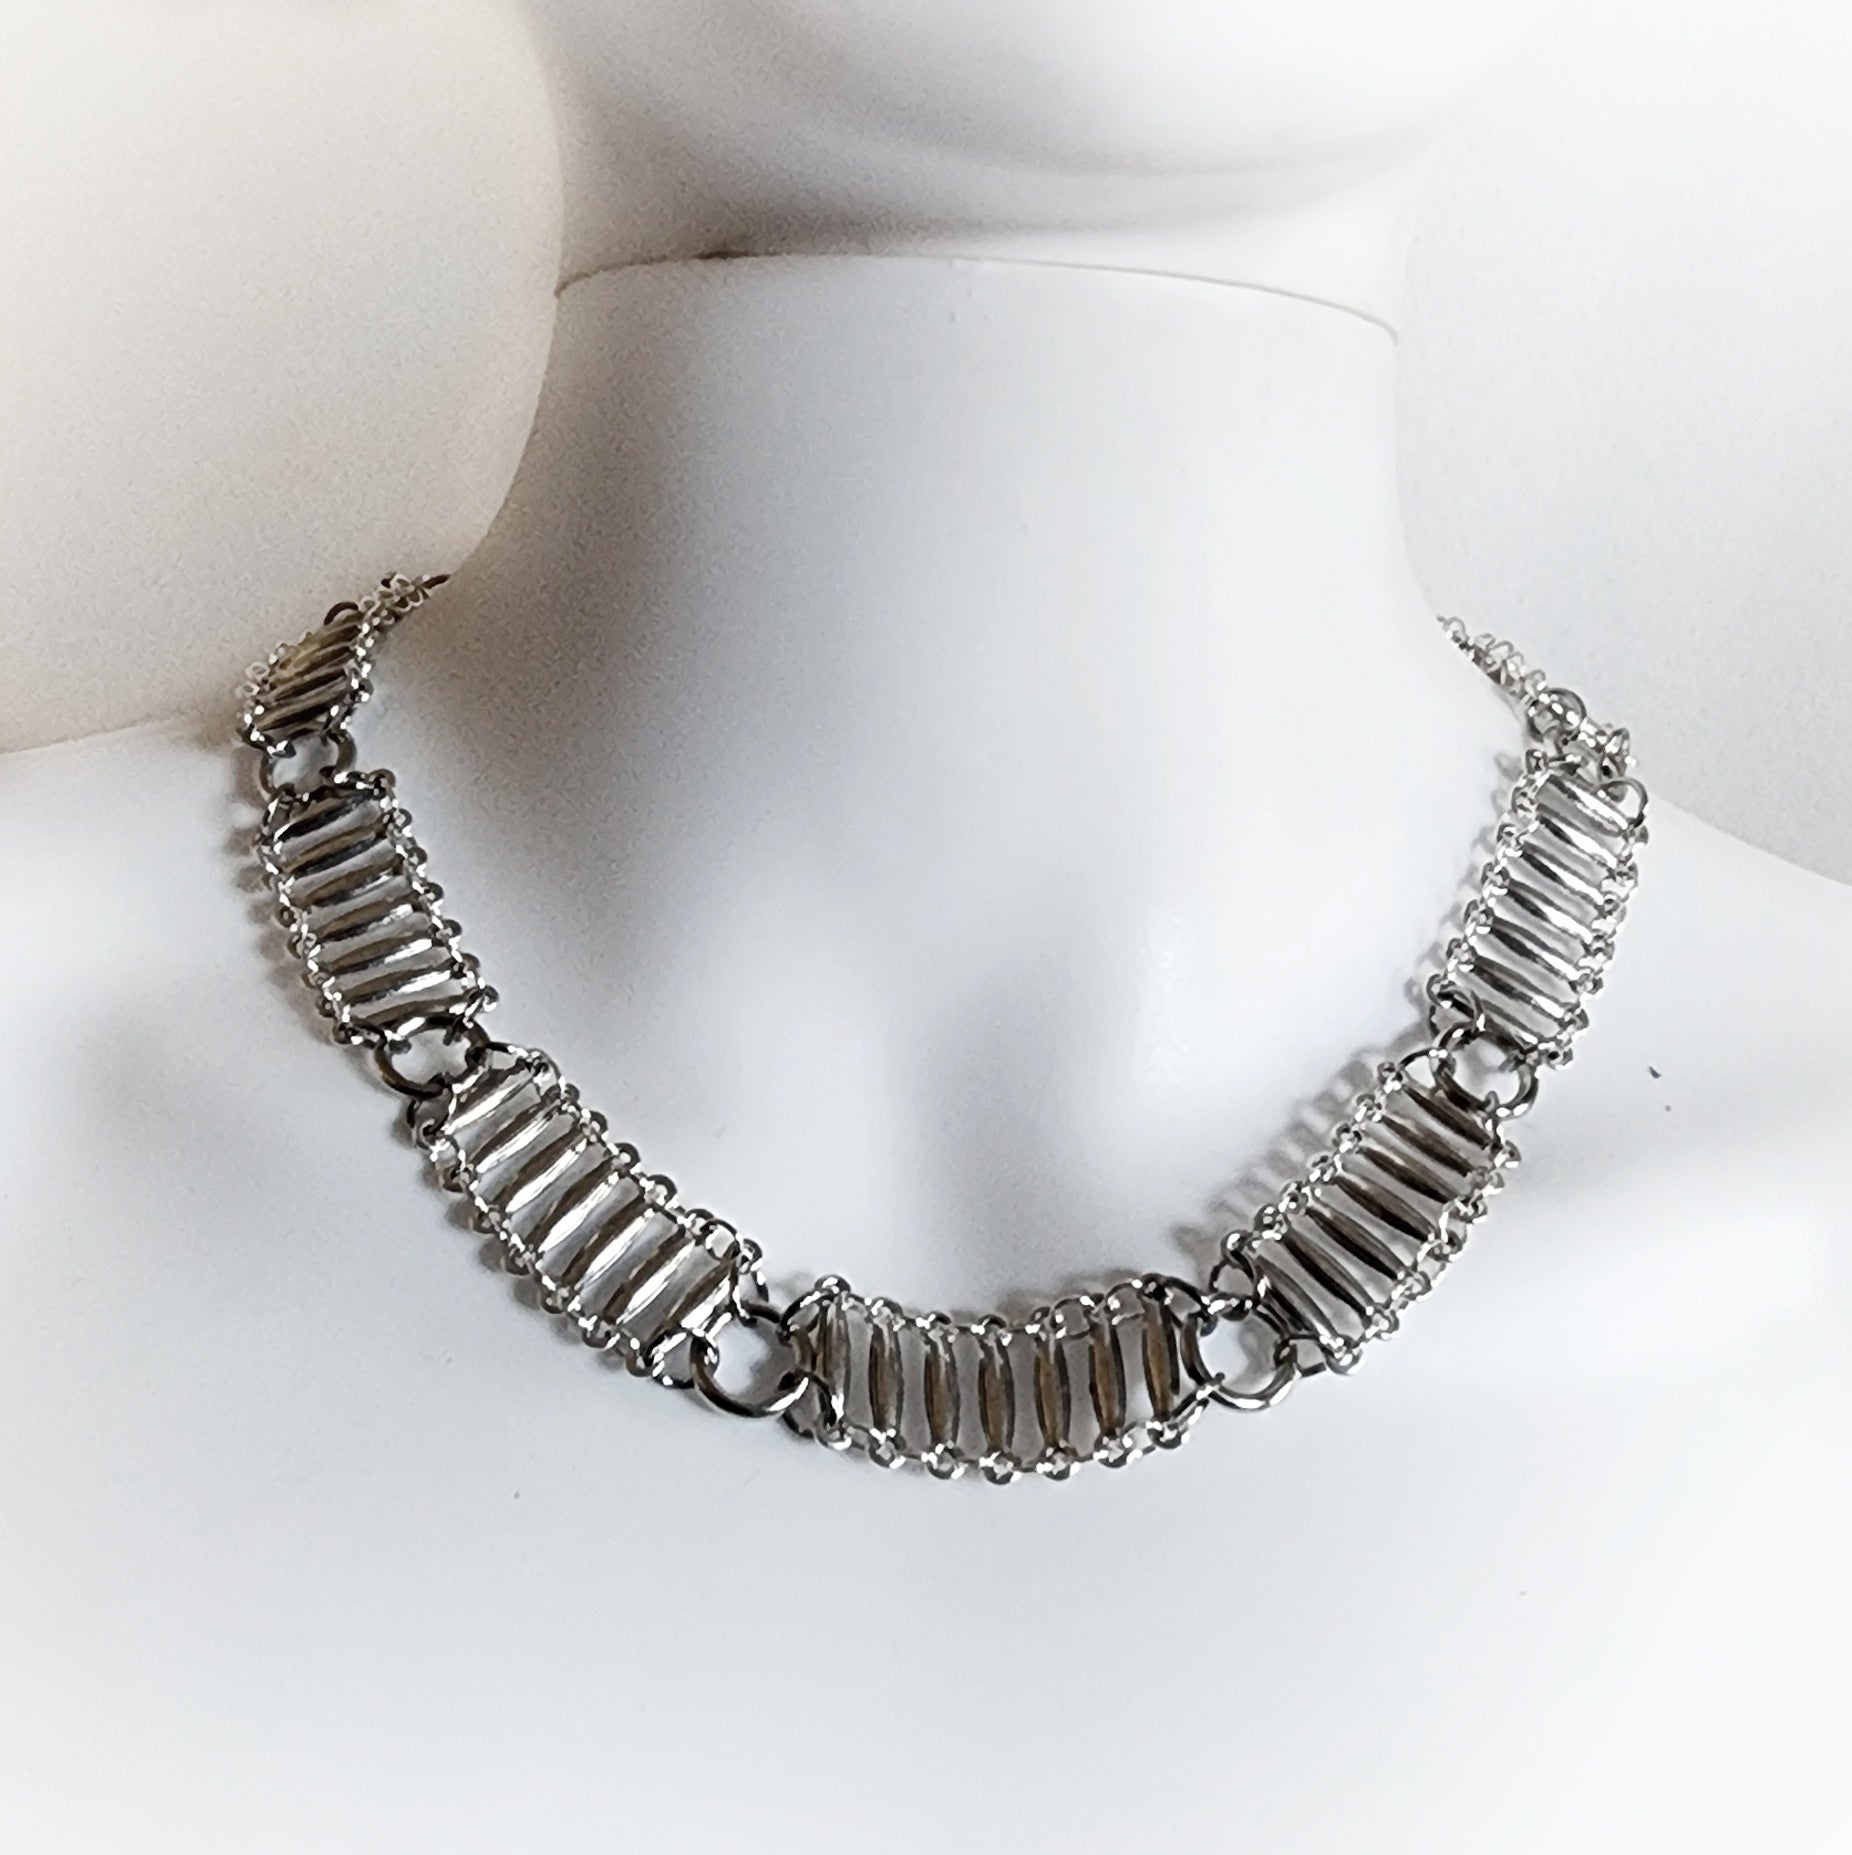 Behind Silver Bars Necklace